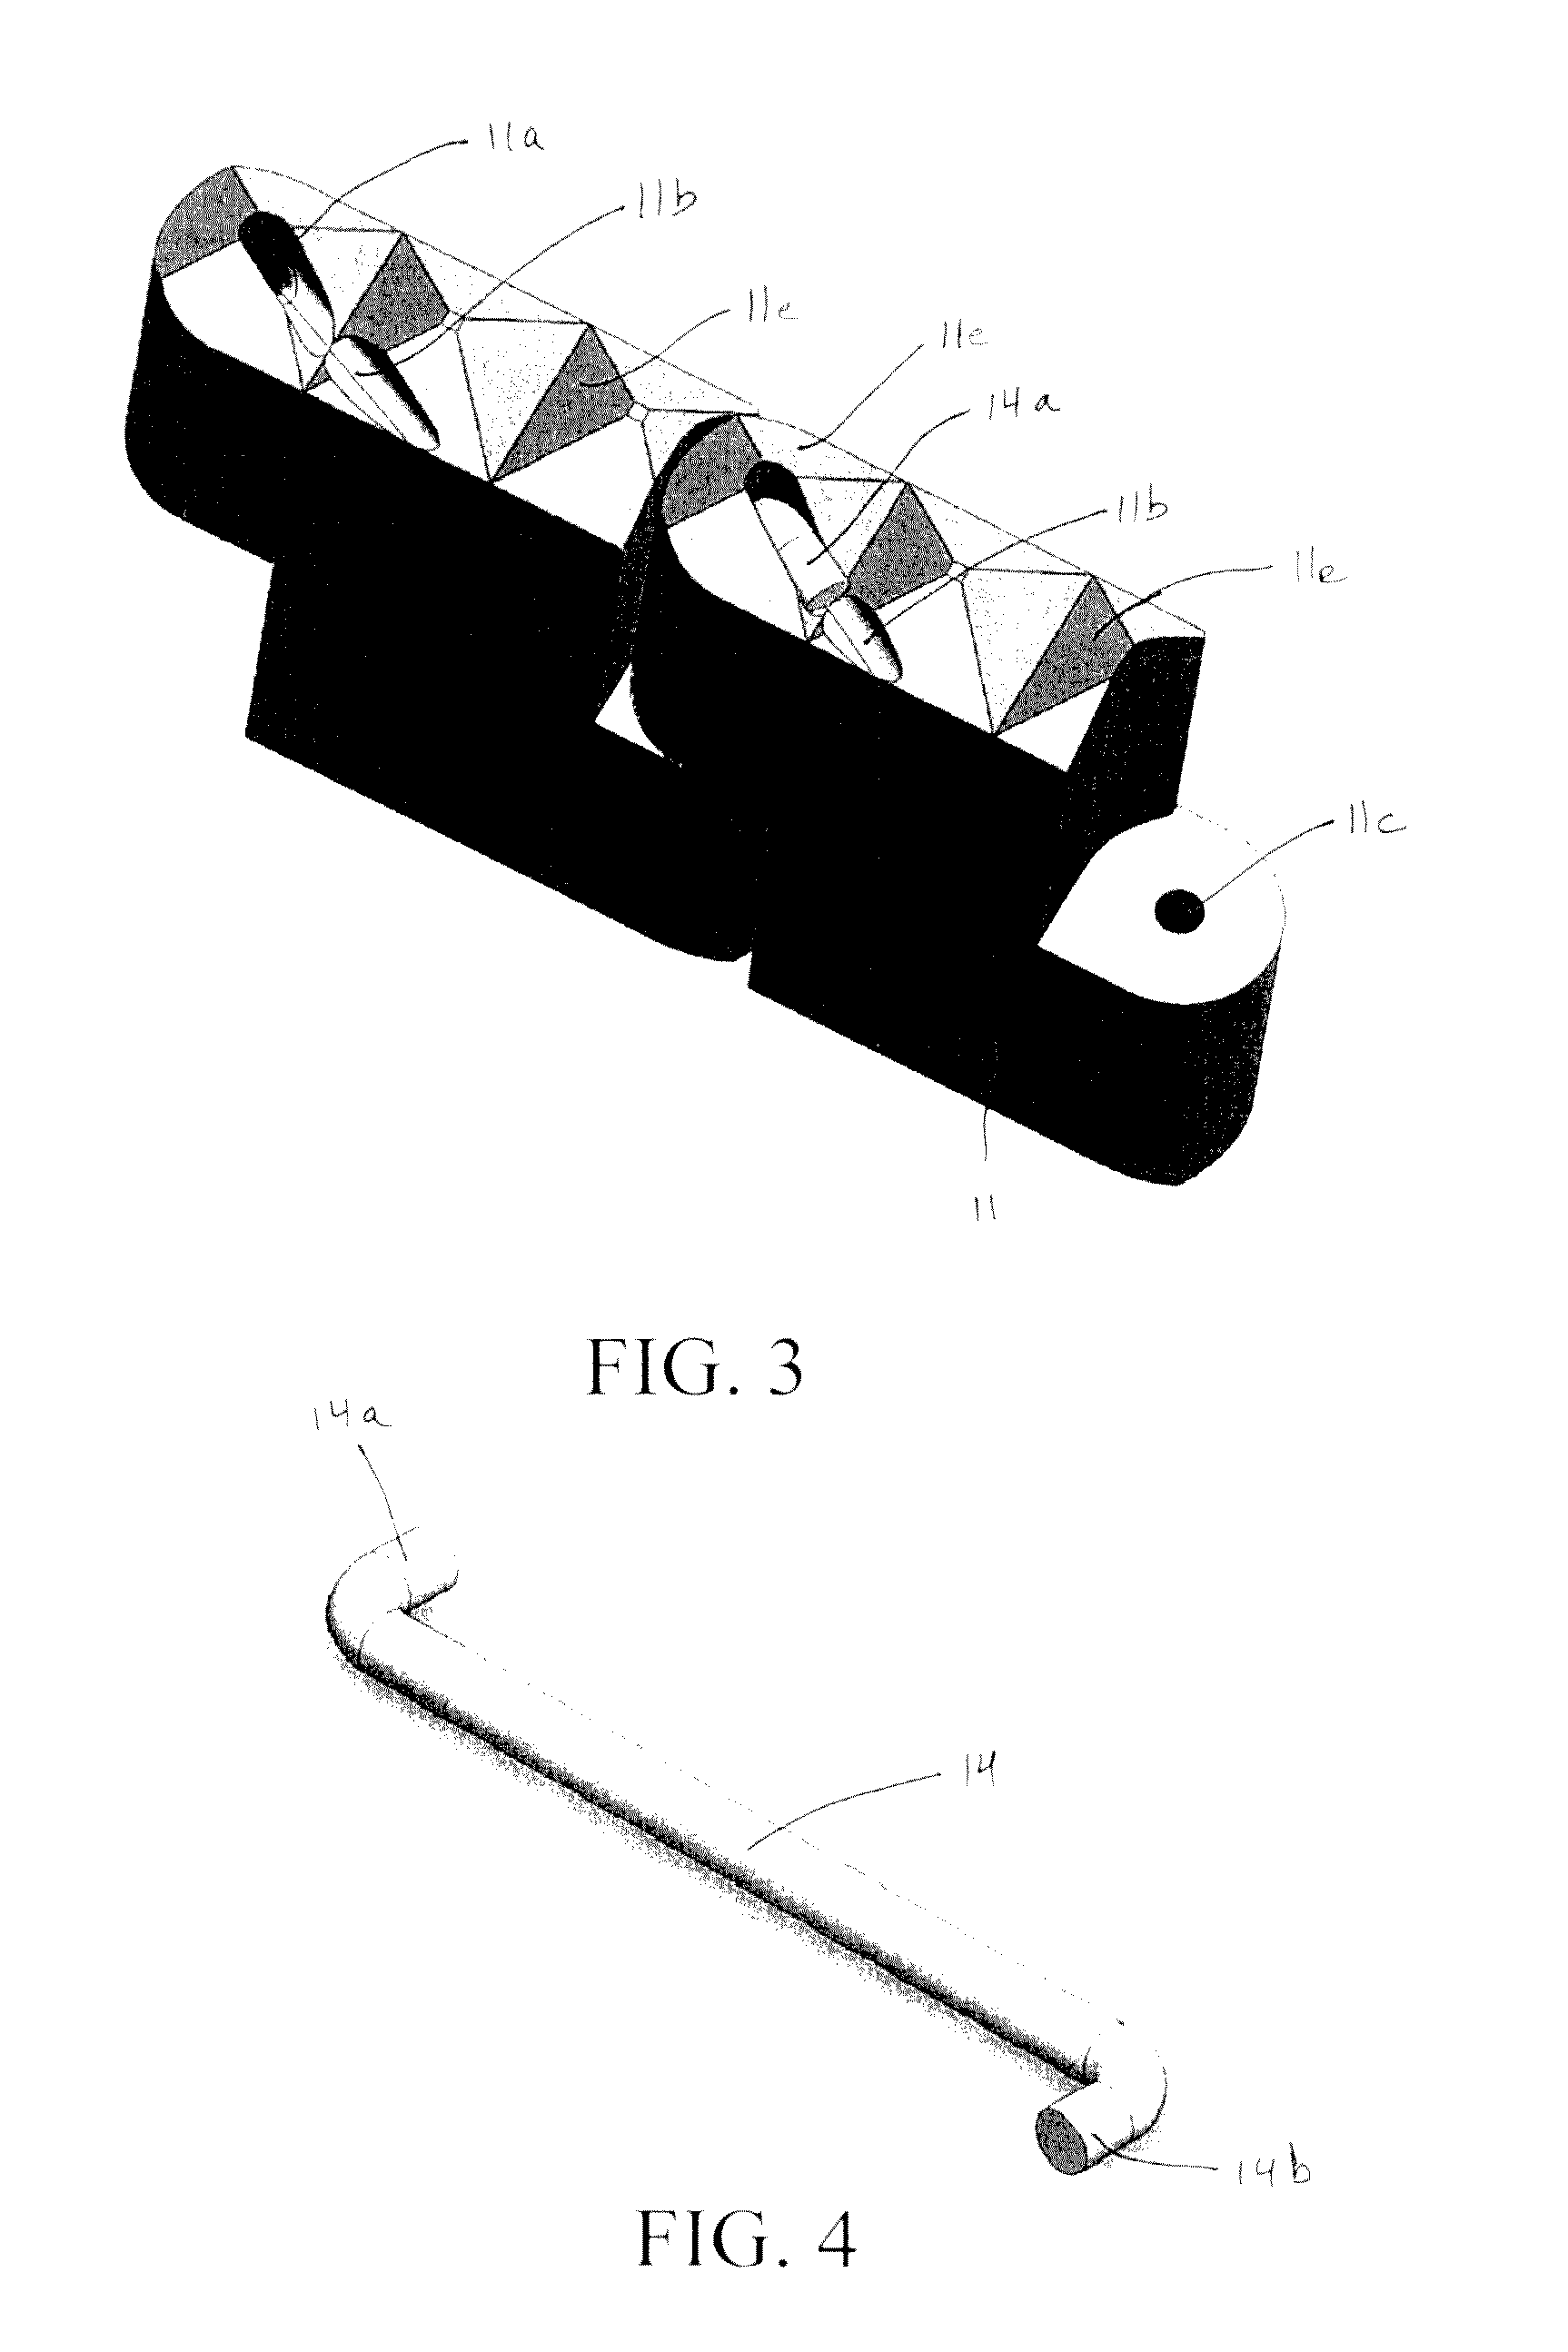 Expandable inter-vertebral cage and method of installing same